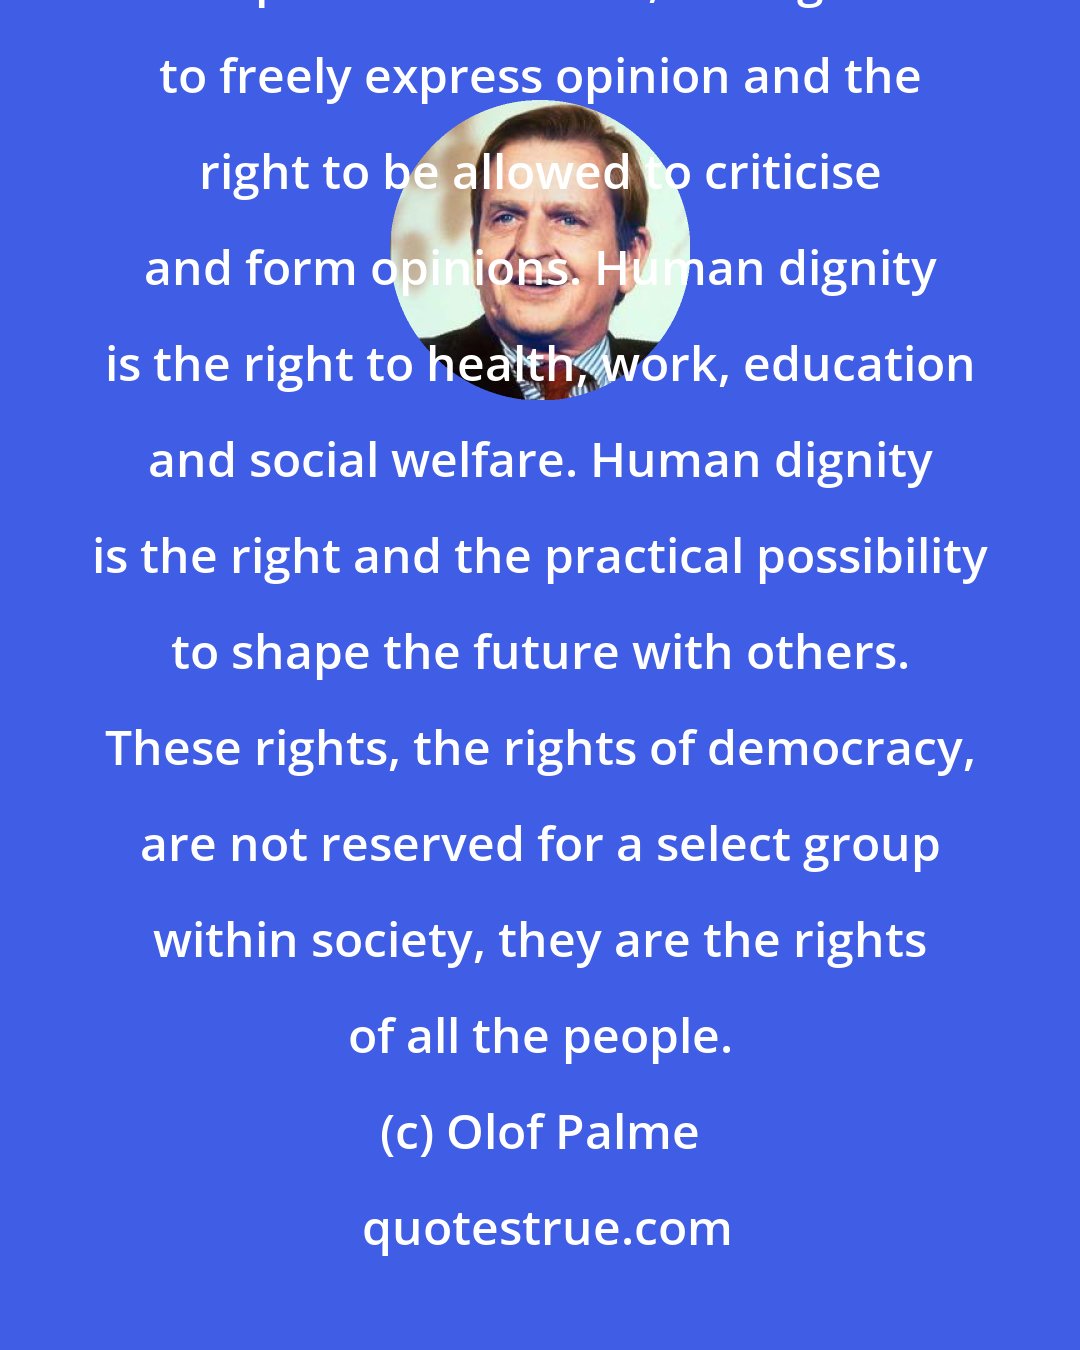 Olof Palme: For us democracy is a question of human dignity. And human dignity is political freedom, the right to freely express opinion and the right to be allowed to criticise and form opinions. Human dignity is the right to health, work, education and social welfare. Human dignity is the right and the practical possibility to shape the future with others. These rights, the rights of democracy, are not reserved for a select group within society, they are the rights of all the people.